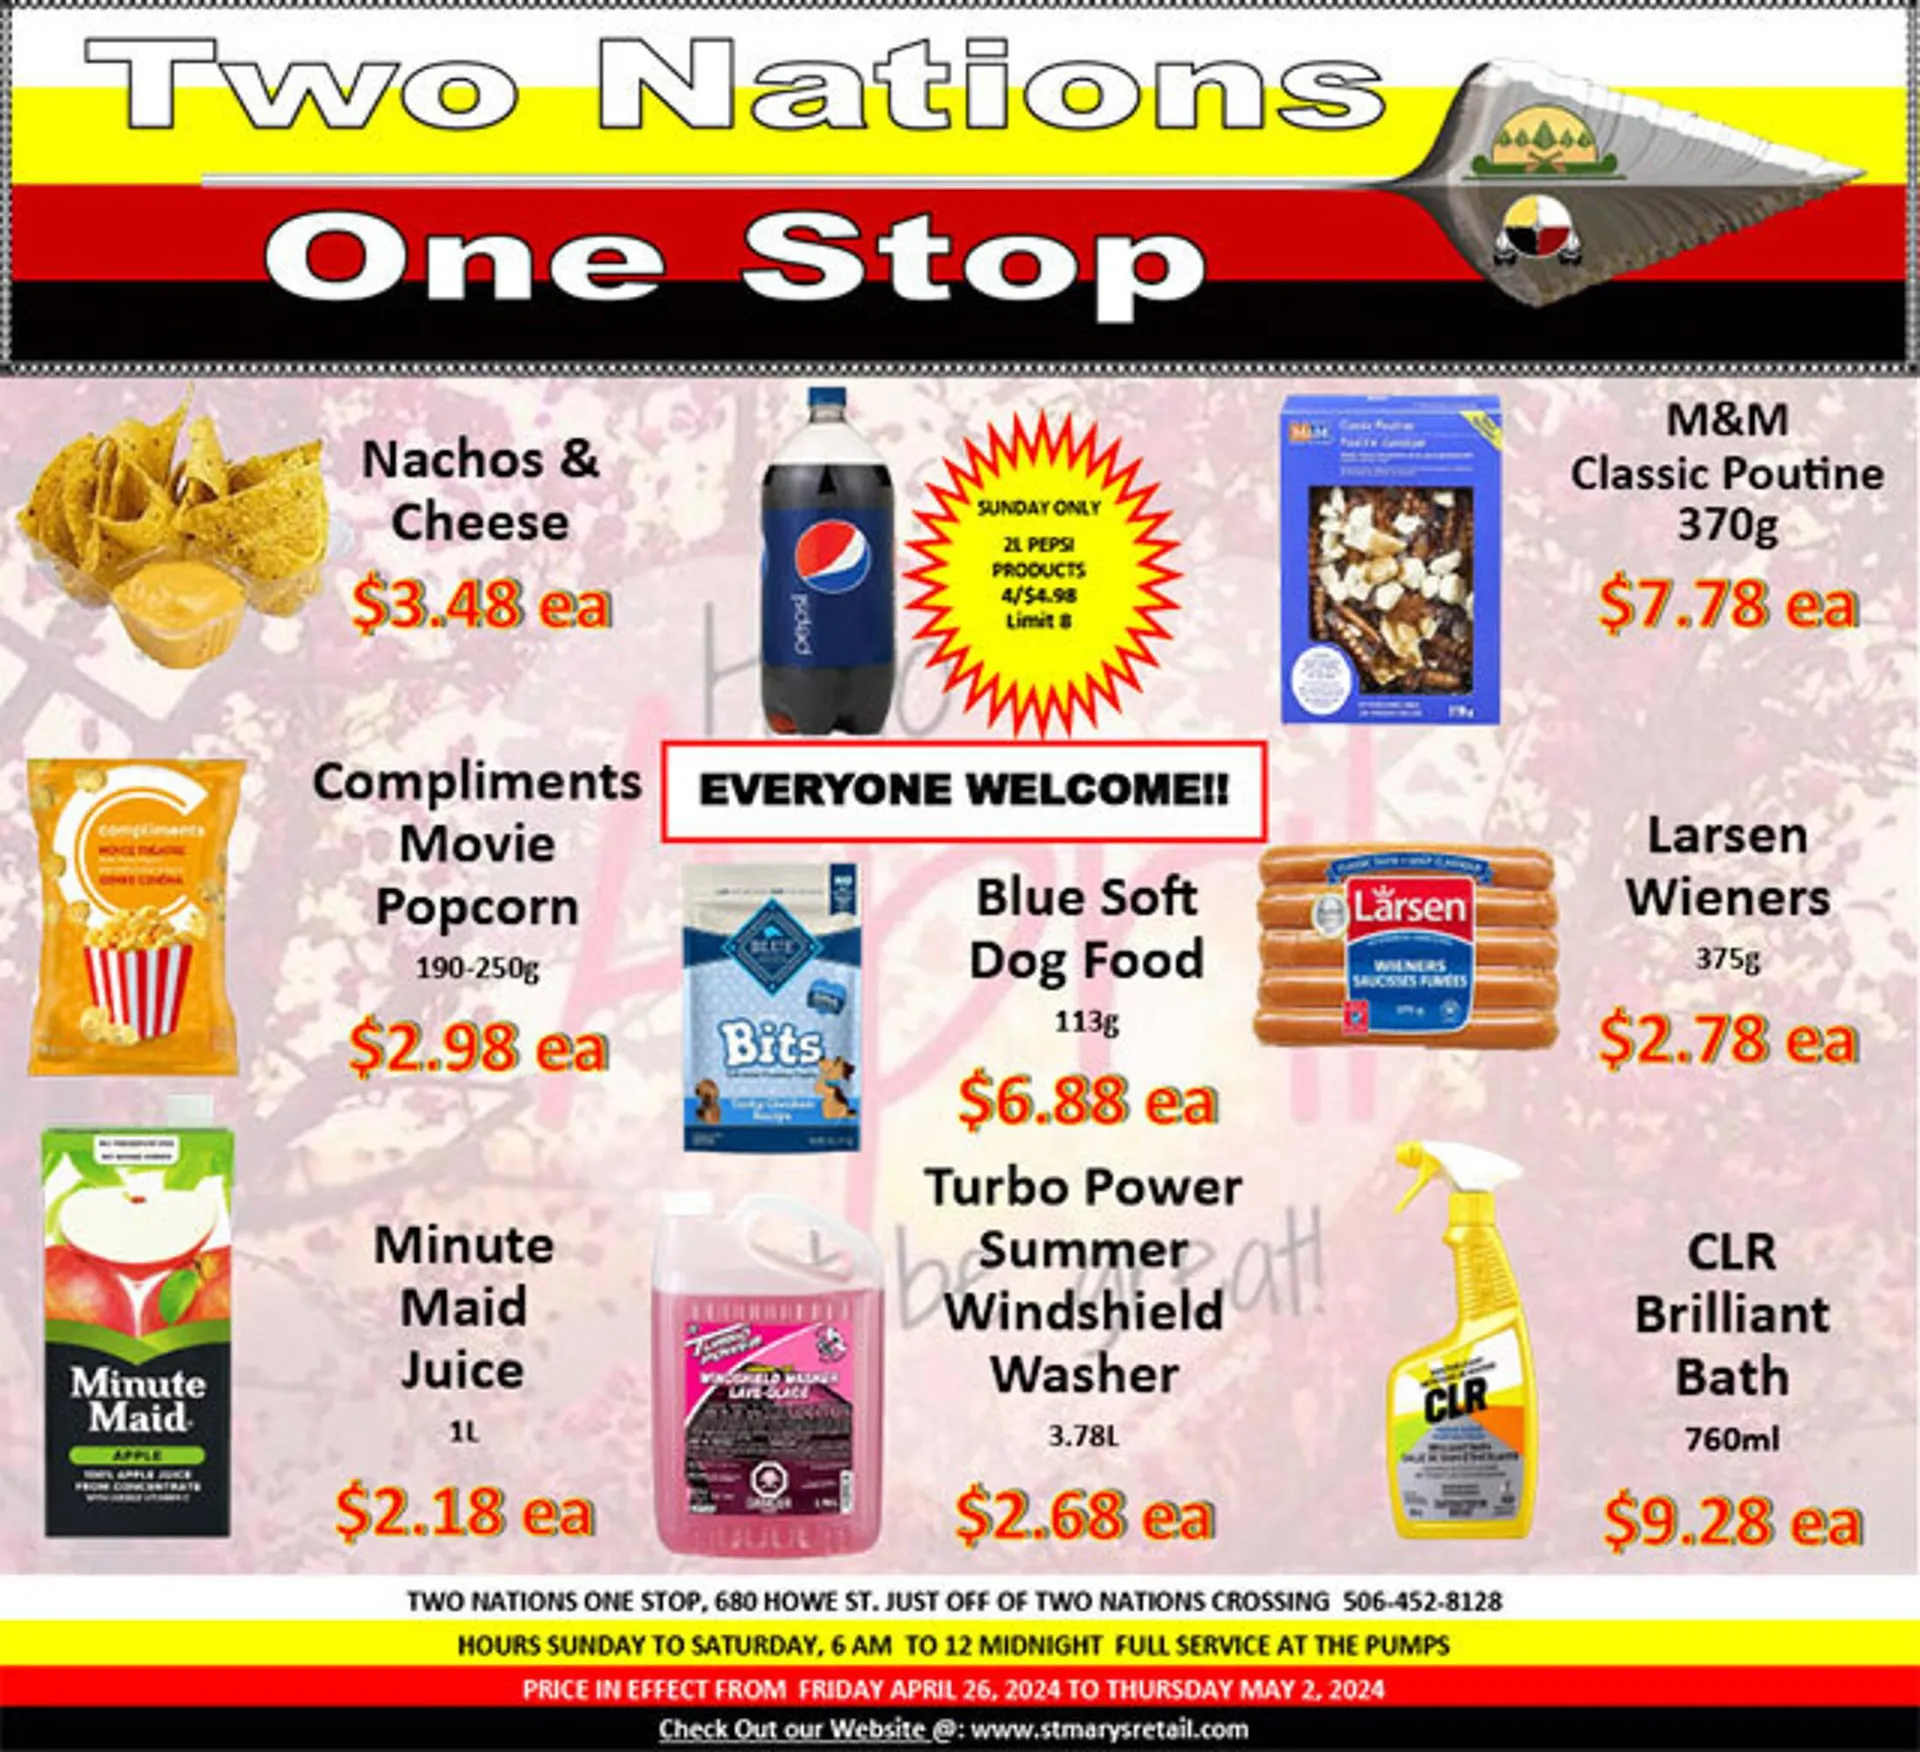 Two Nations One Stop flyer - 1